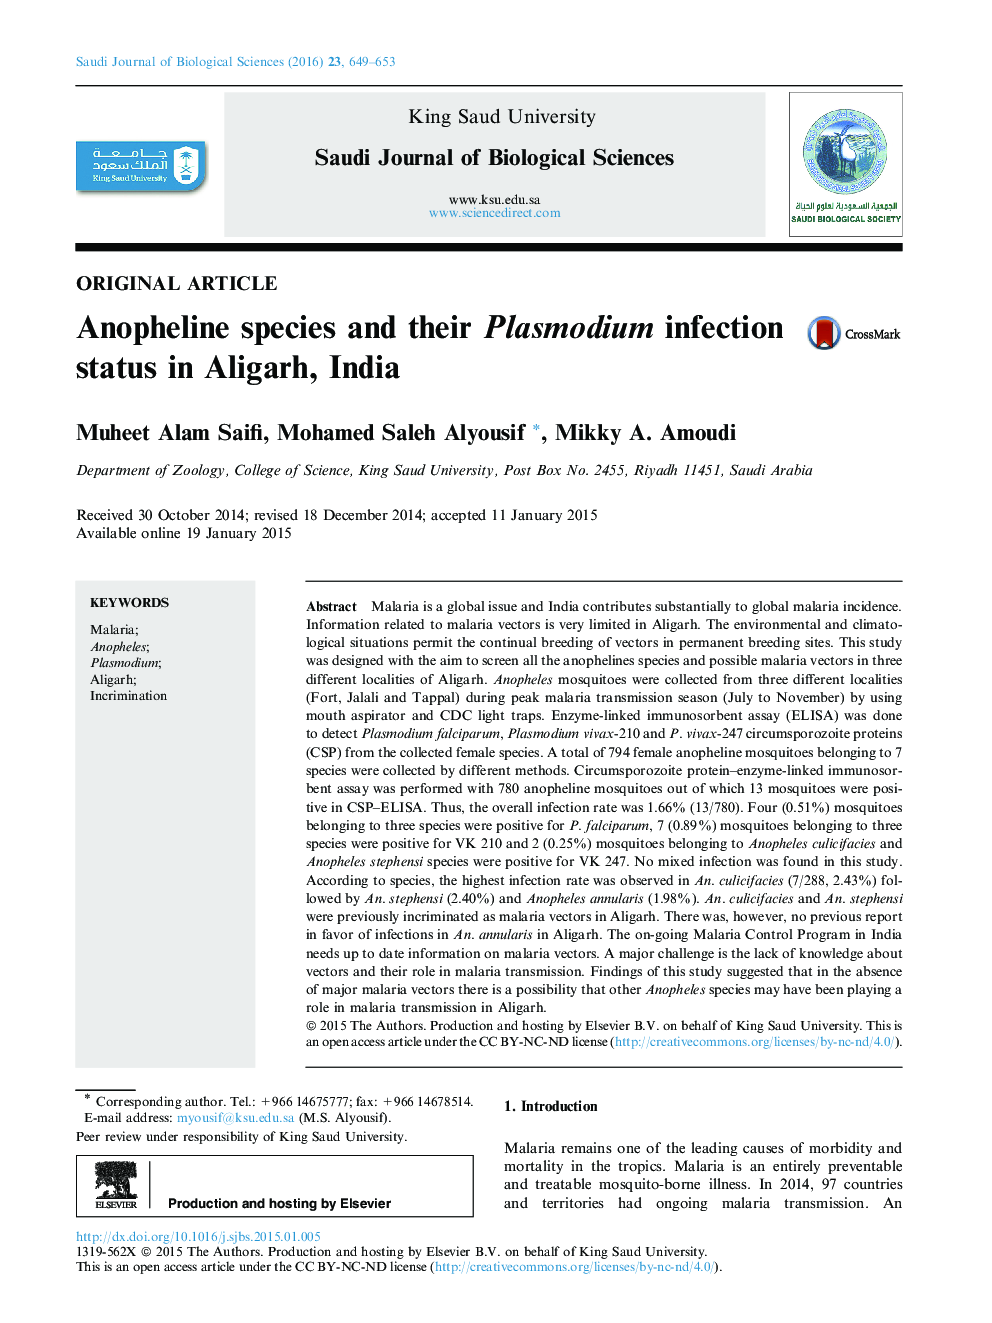 Anopheline species and their Plasmodium infection status in Aligarh, India 